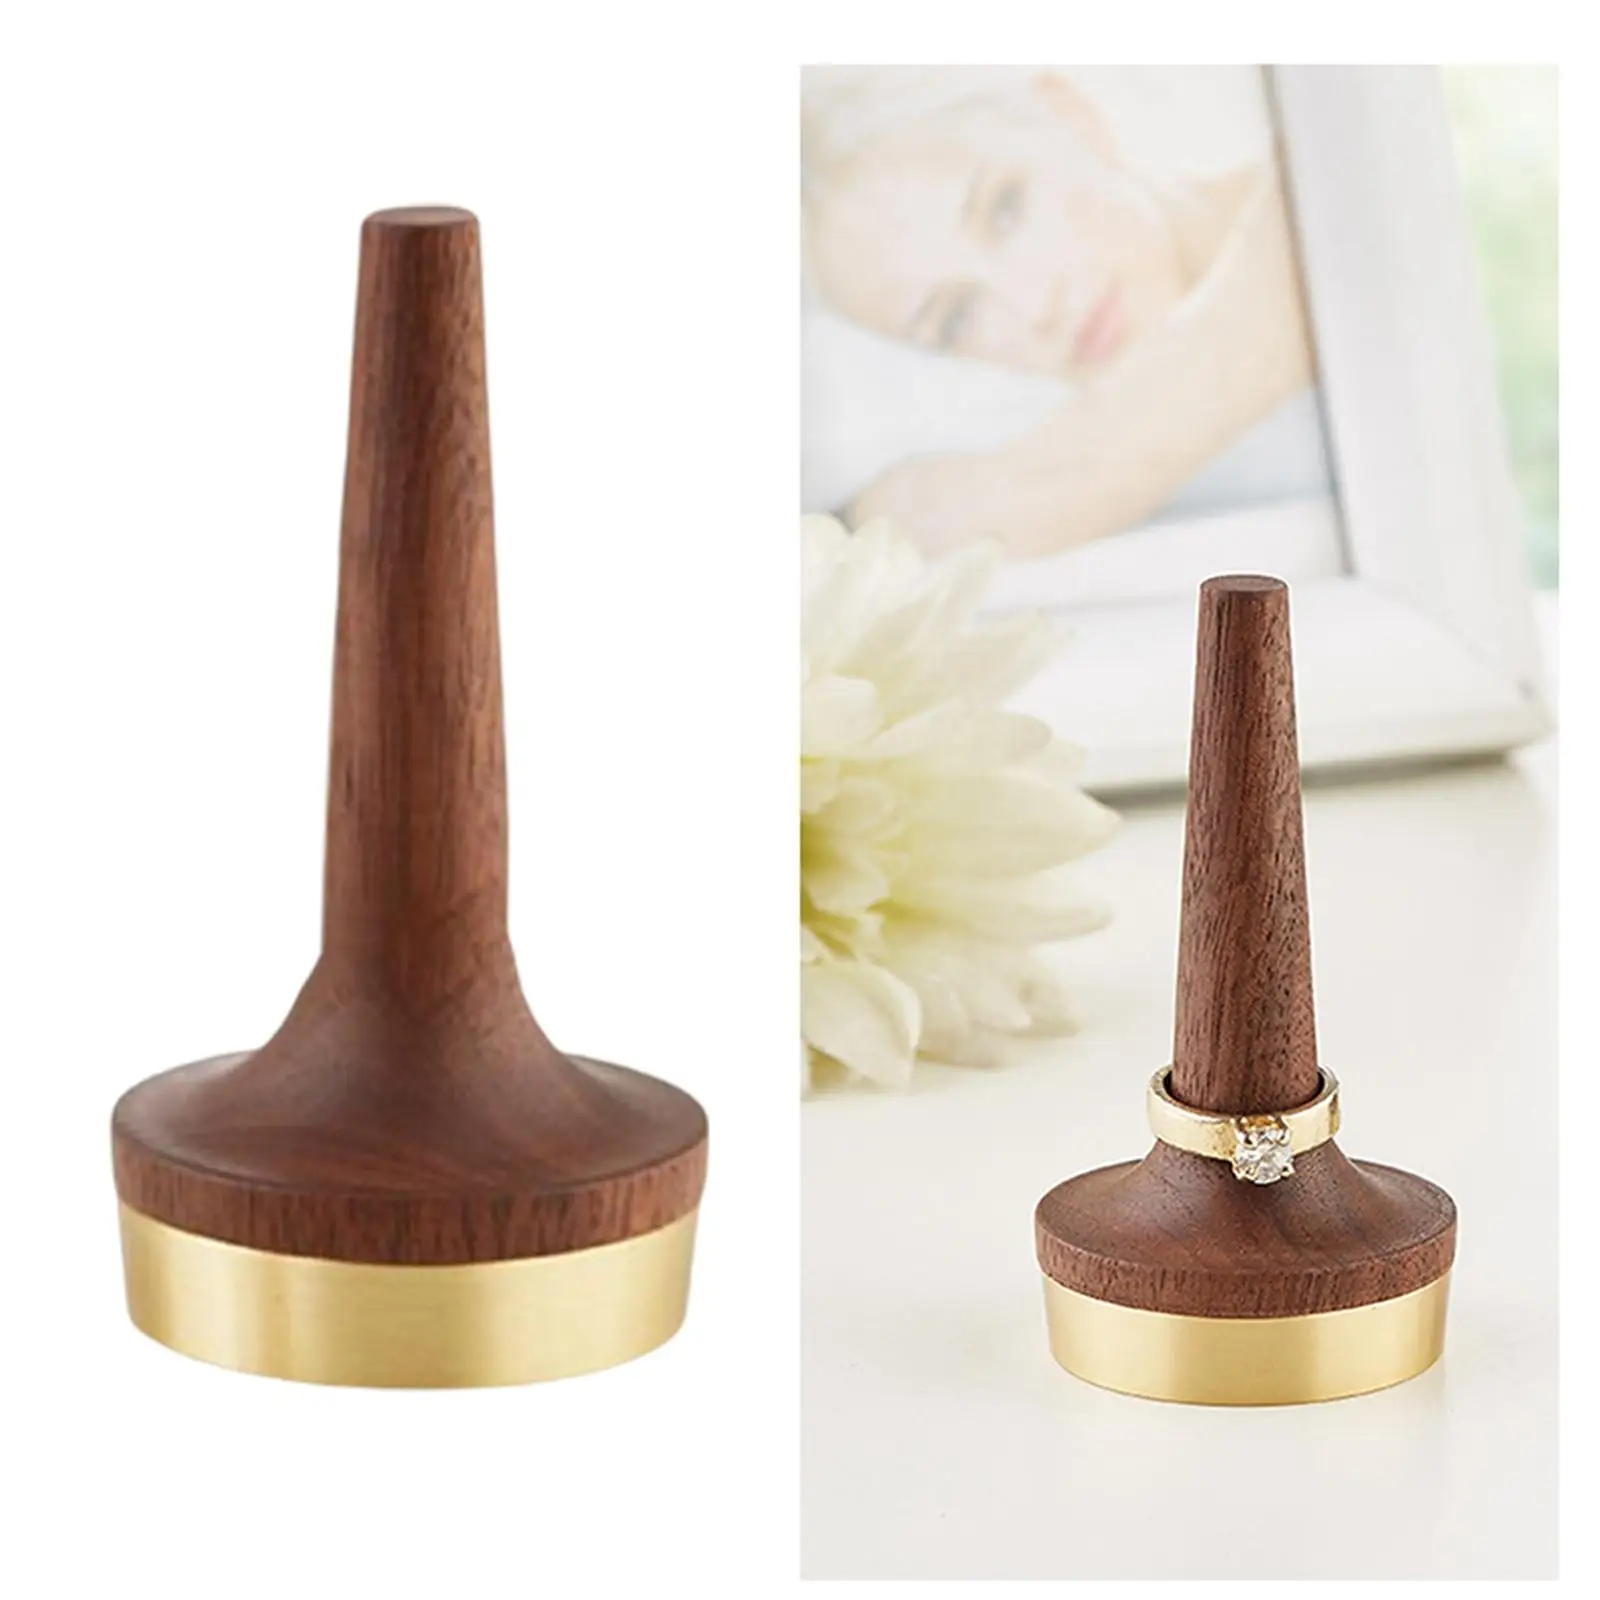 Cone Shape Display for Jewelry Showcase Display Stand for Jewelry /Wedding